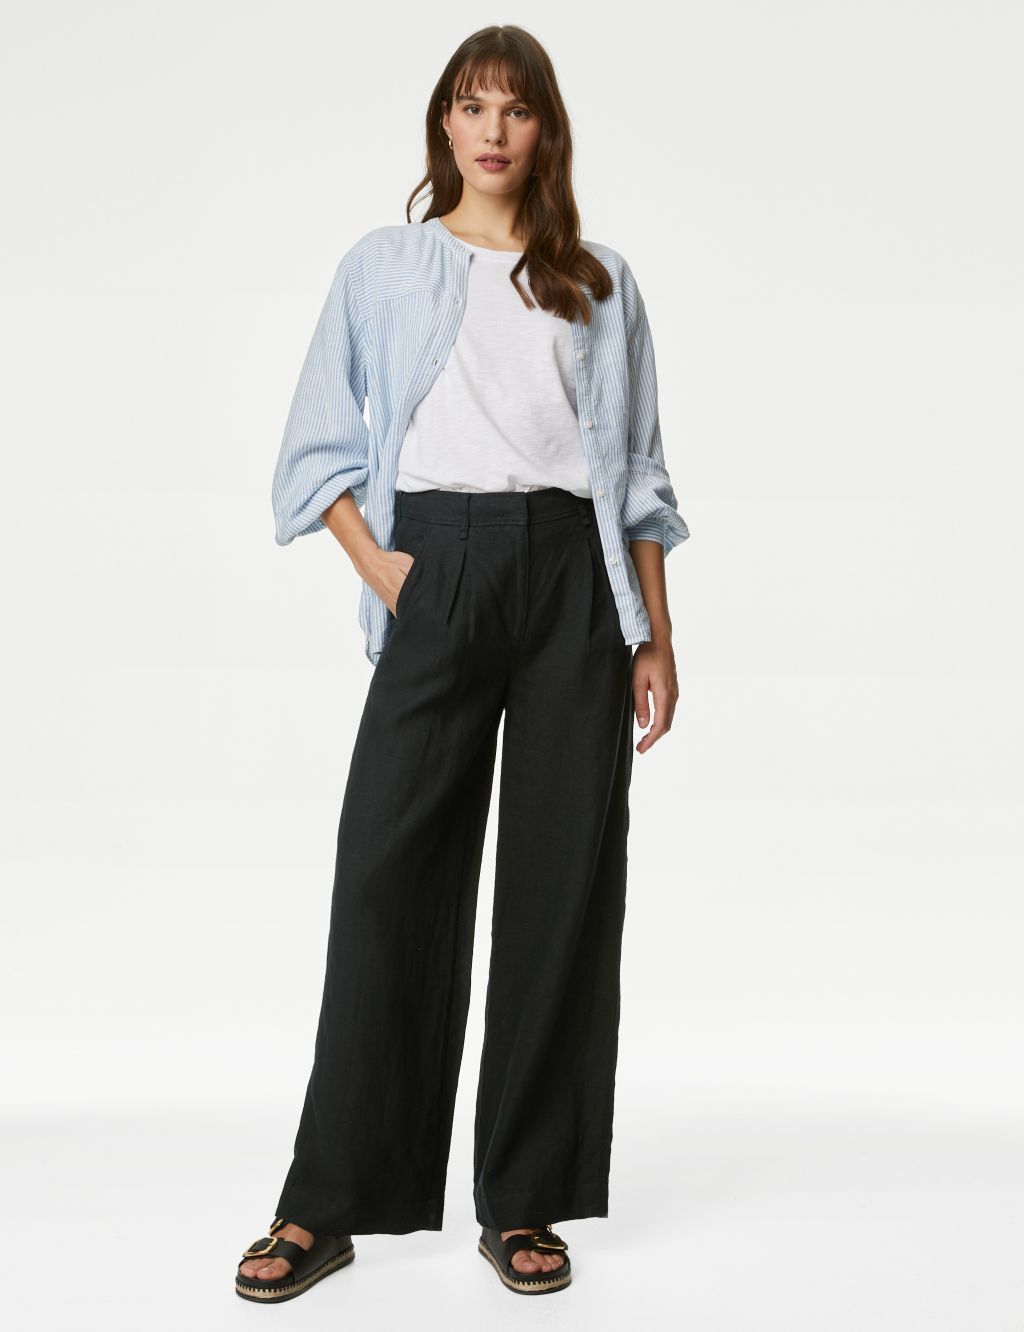 Relaxed: trousers with an elasticated frilled waistband - light beige